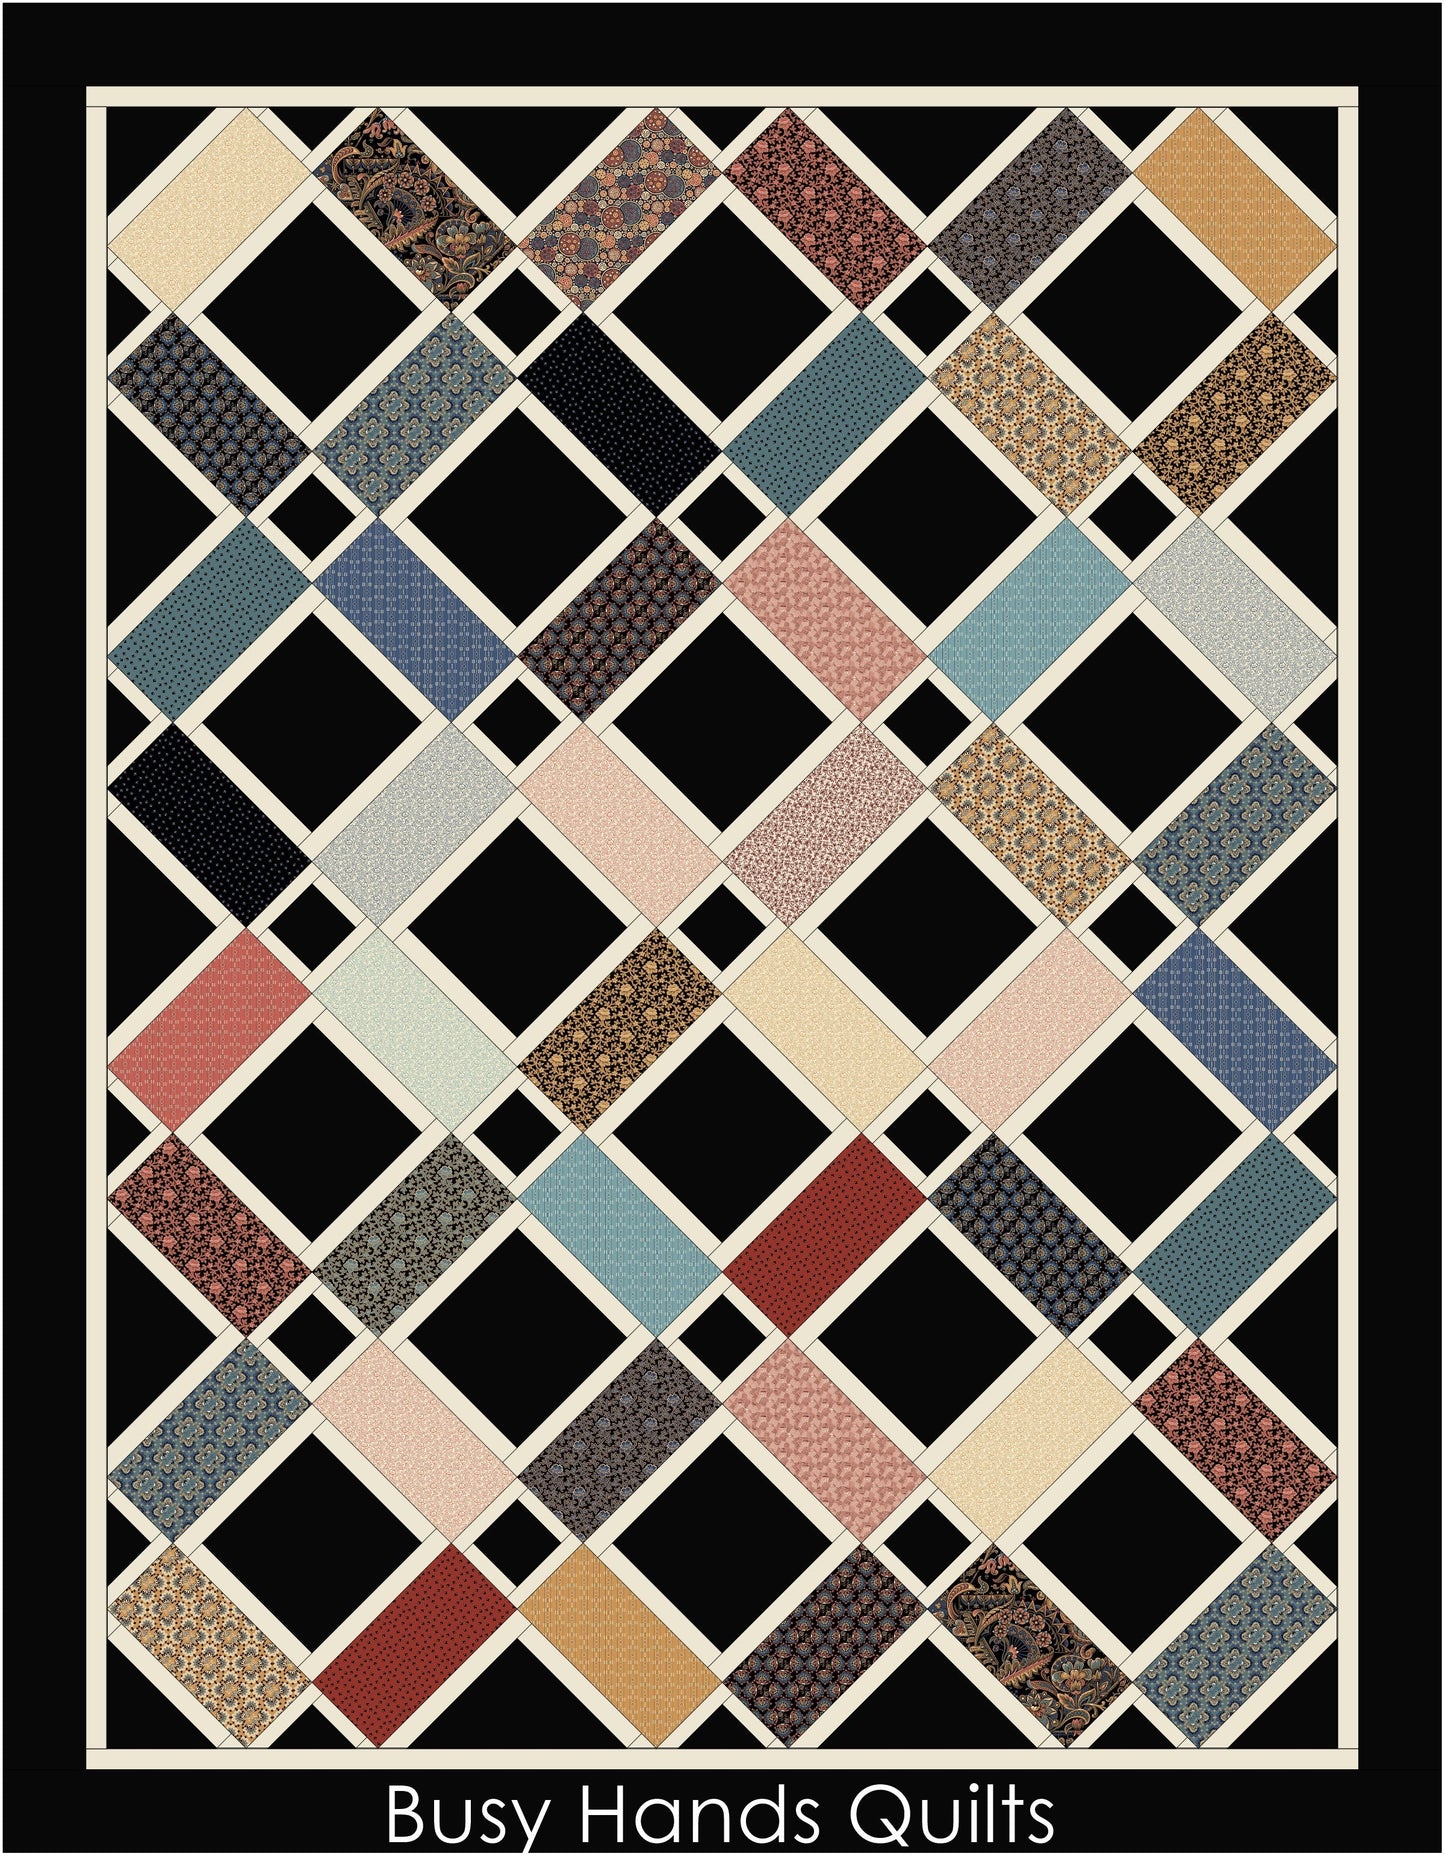 Looking Glass Quilt Pattern PDF DOWNLOAD Busy Hands Quilts $12.99